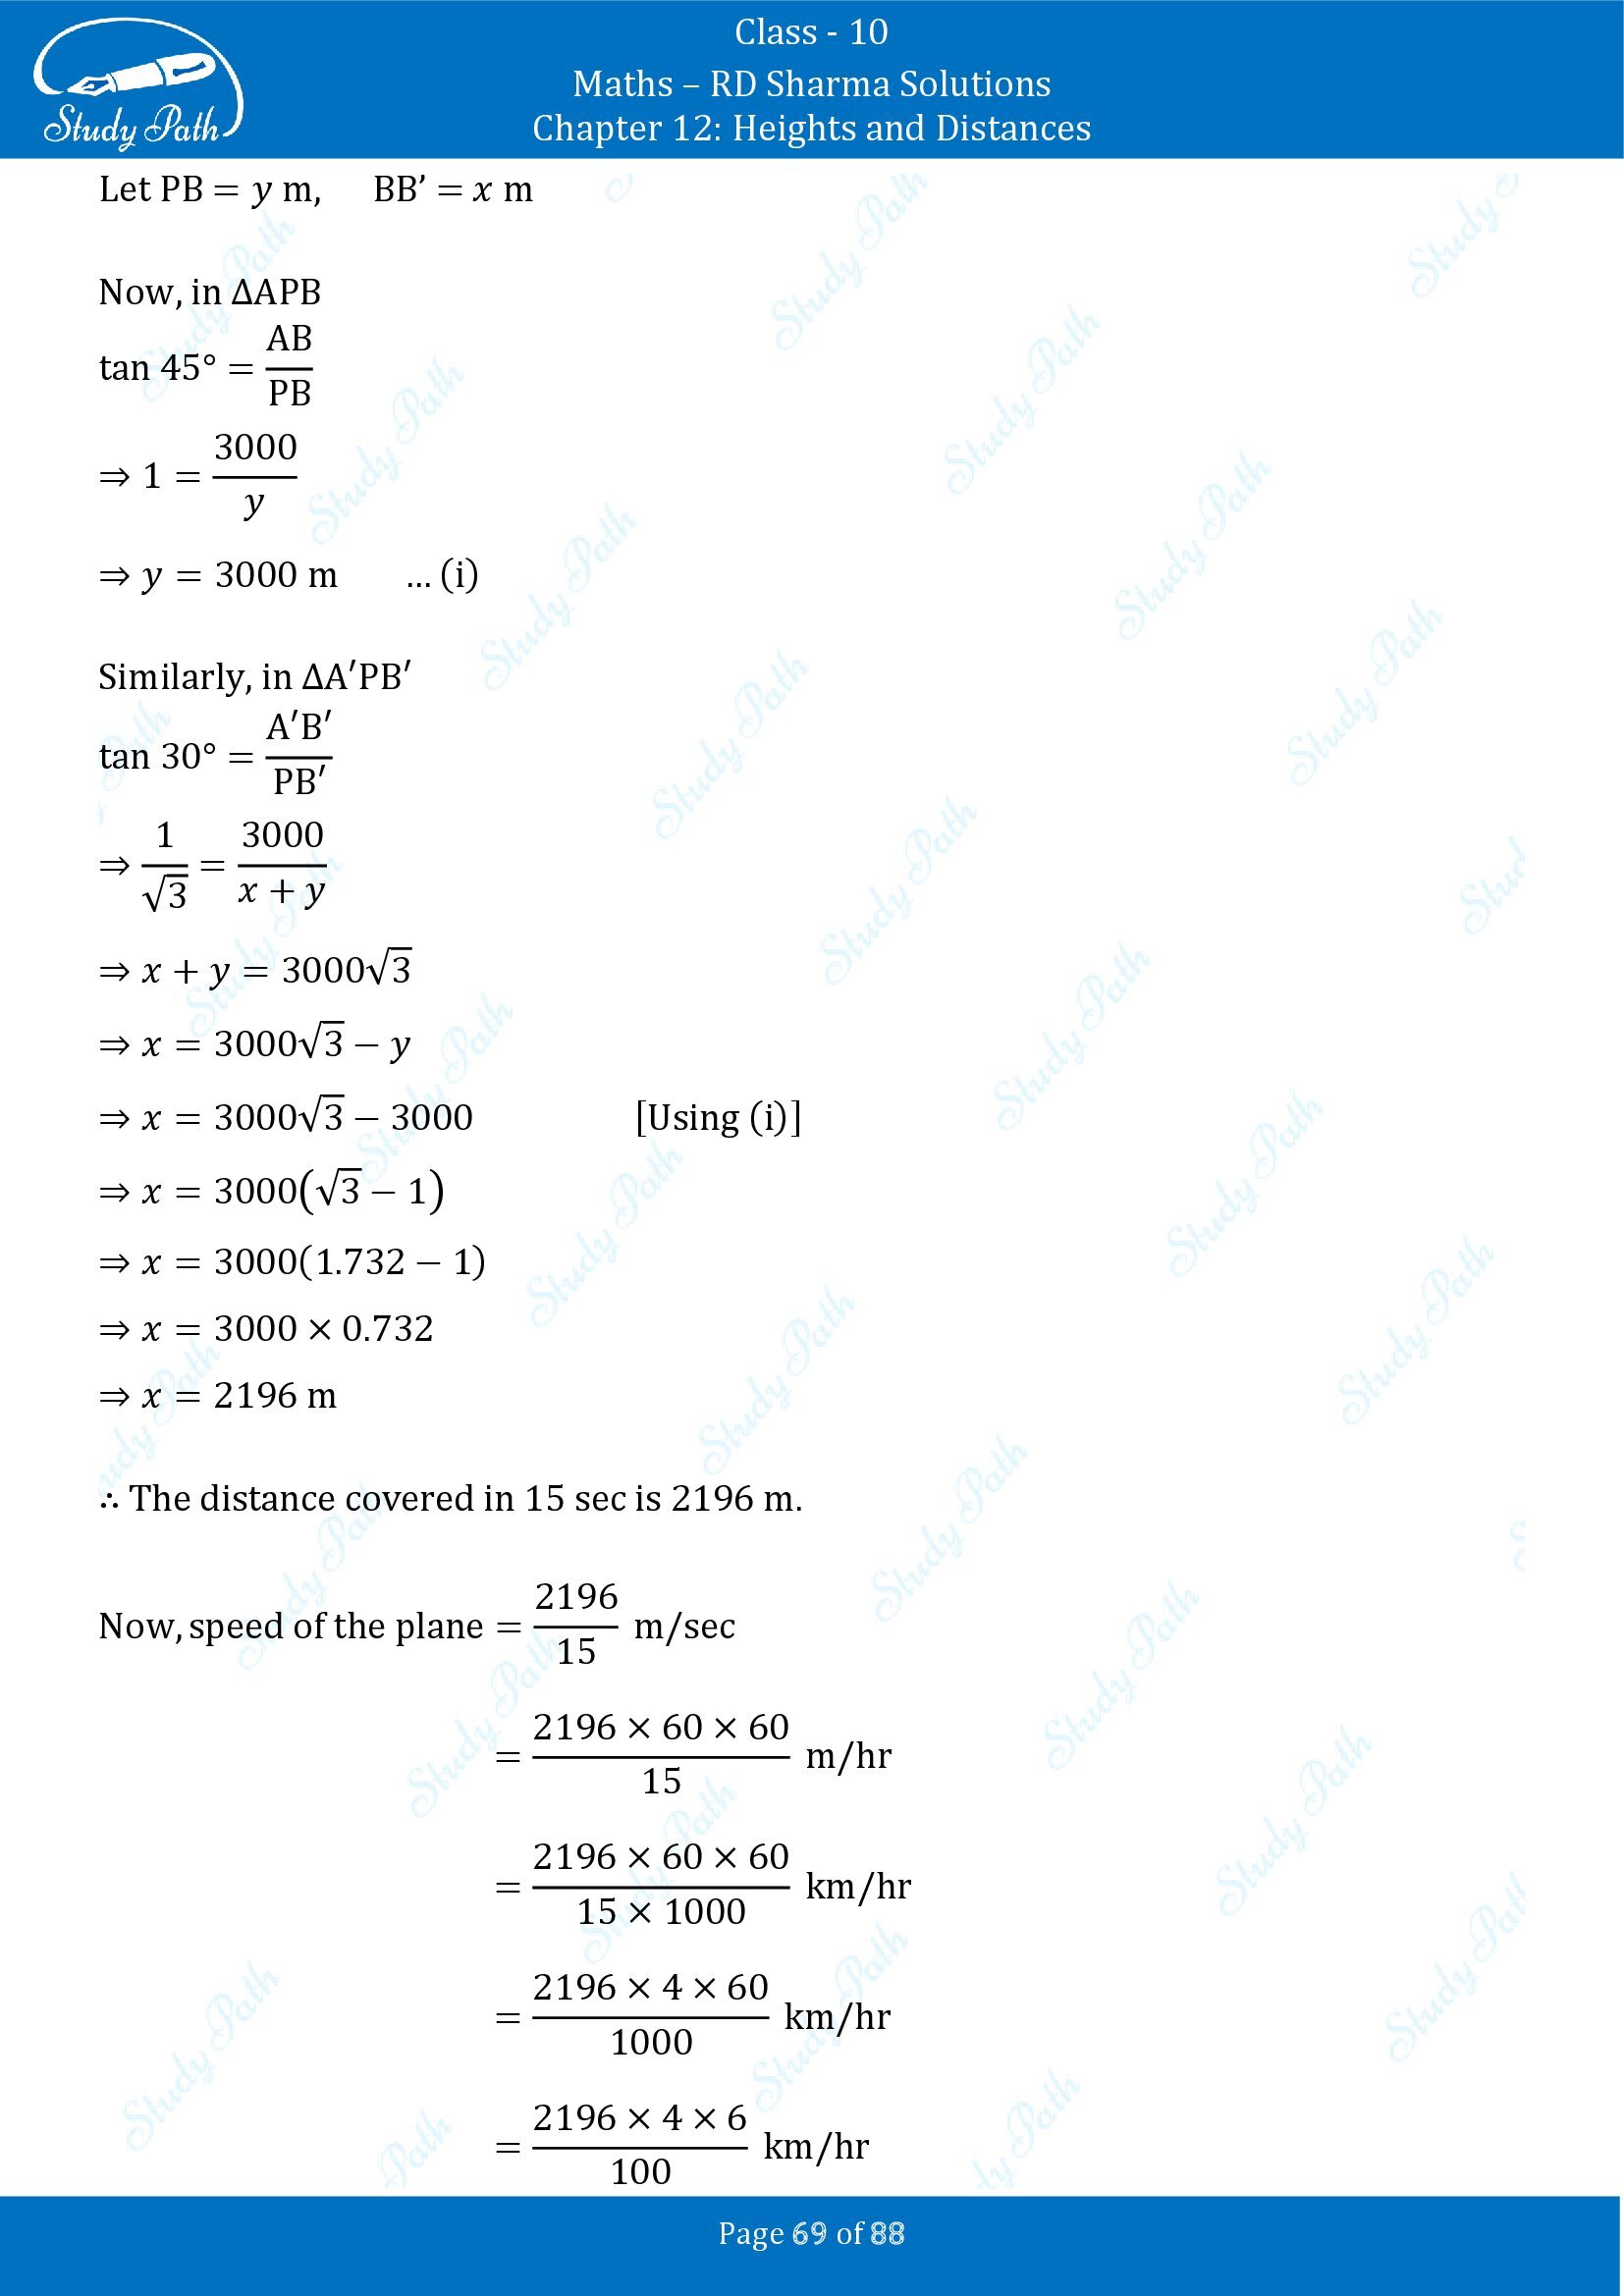 RD Sharma Solutions Class 10 Chapter 12 Heights and Distances Exercise 12.1 00069